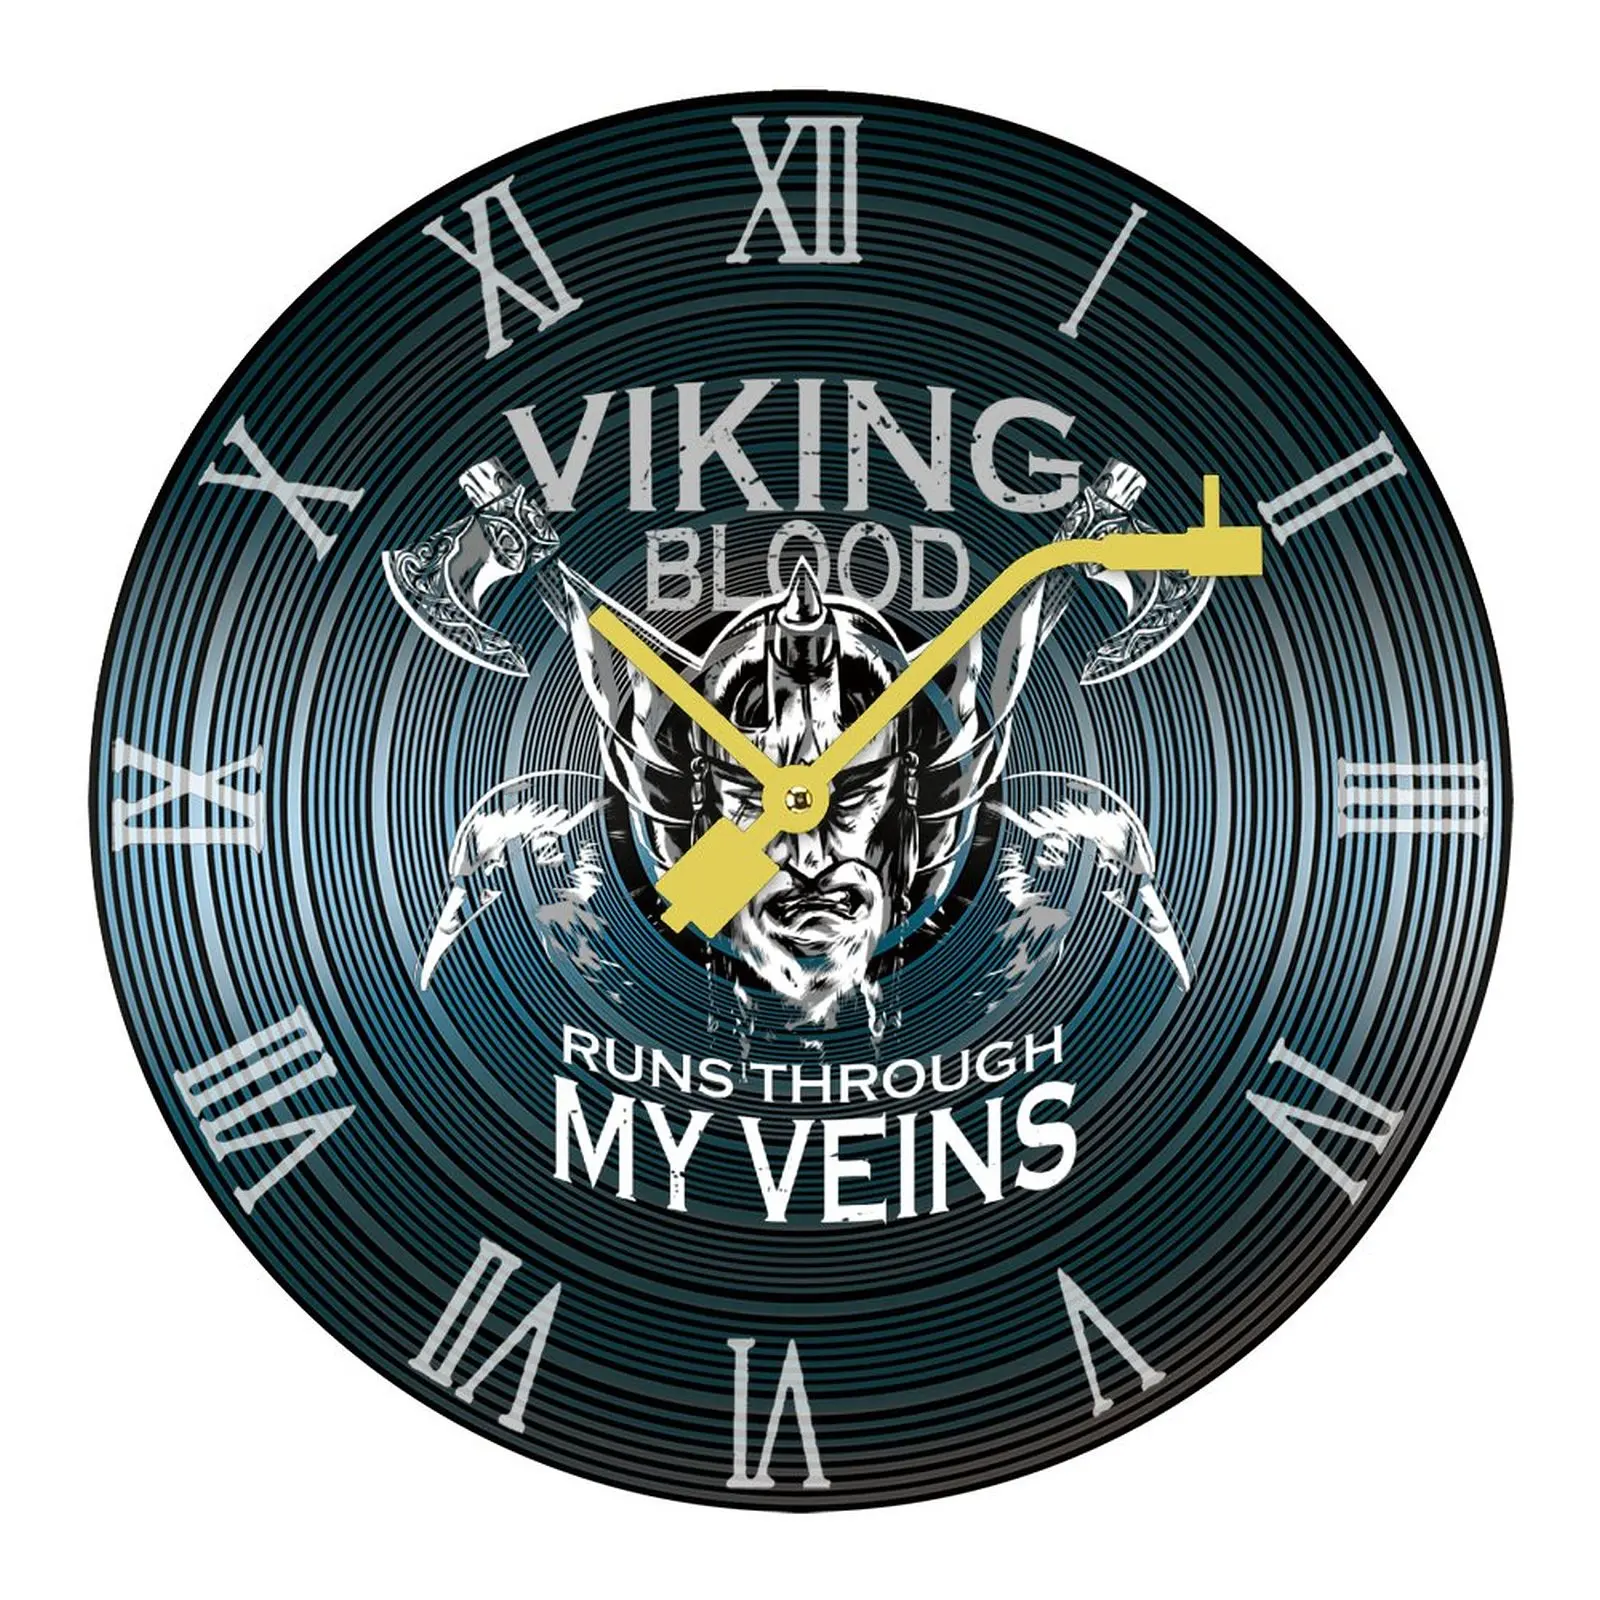 

DIY Mute Viking Blood Runs Through My Veins Vikings G Record Wooden Wall Clock Top Quality Home Decoration New Guest Bedroom F